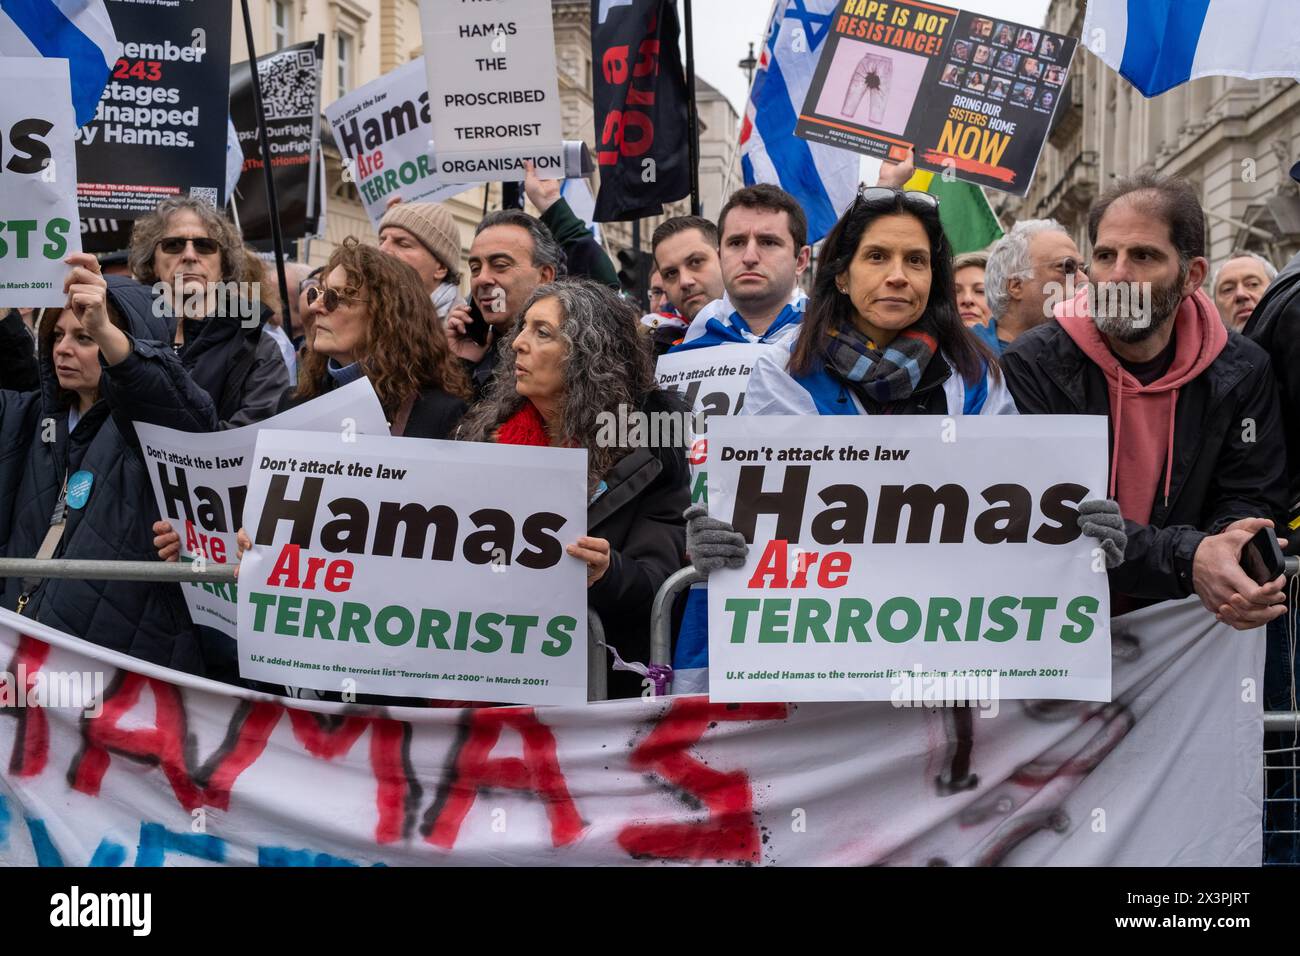 Counter protesters hold Hamas are terrorists placards during the demonstration. After several months of pro Palestinian marches held in Central London anti Hamas and pro Israeli demonstrations have started to grow in size and support. Members of the Jewish and British Israeli community have held counter protests along the route of the large Palestinian marches held every two weeks in Central London. Rows of Police and barriers separate the two groups. The Palestinian groups have stated they will continue to march until there is a permanent cease fire in Gaza.With growing support the counter pr Stock Photo